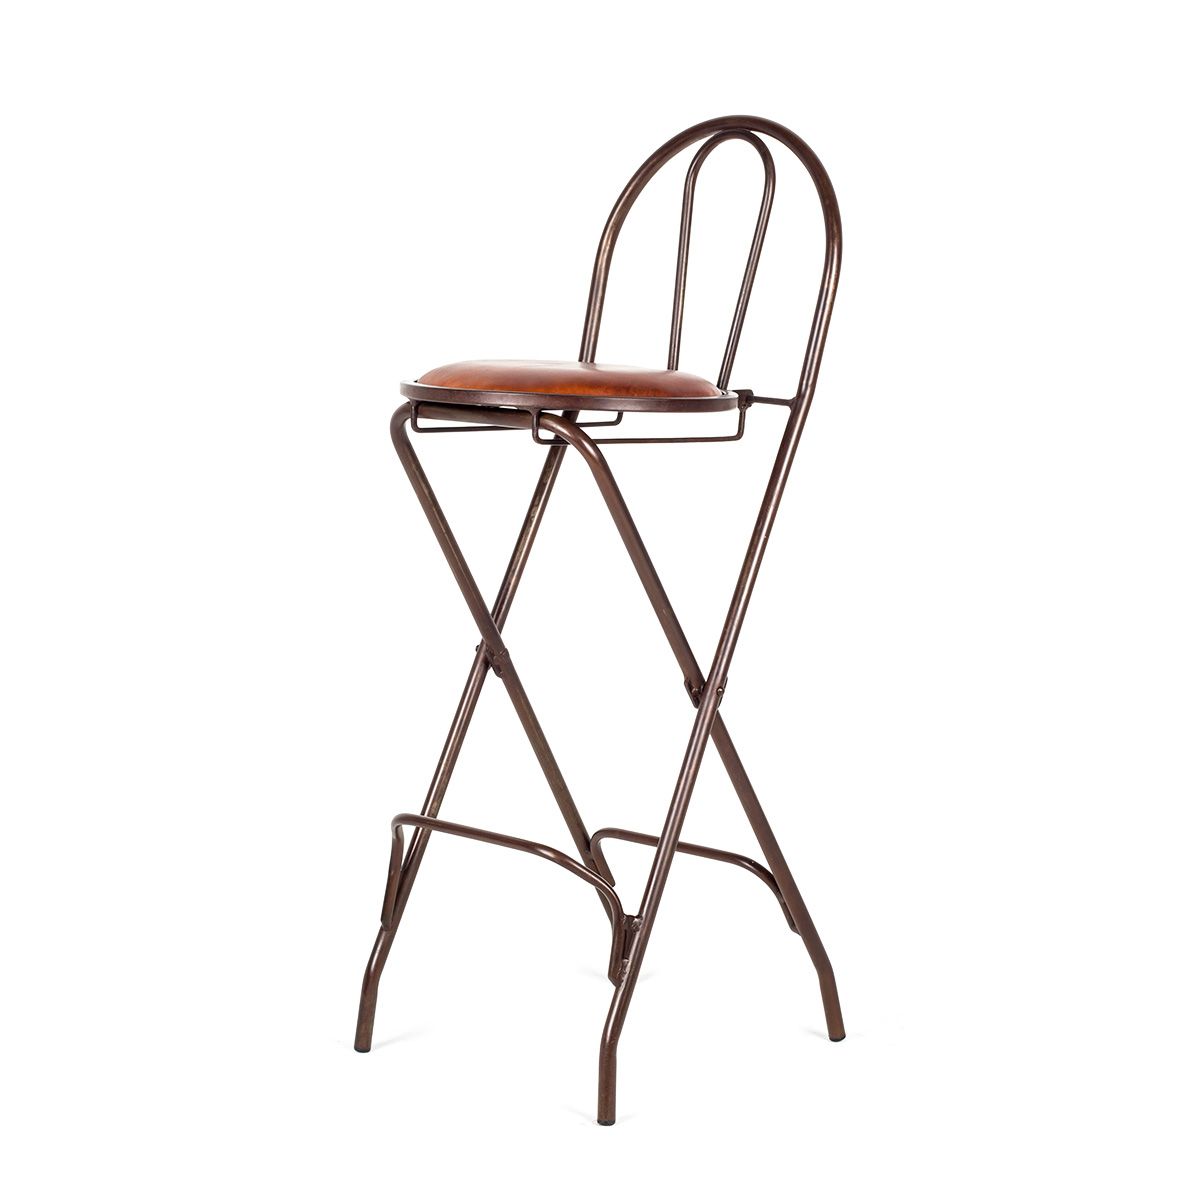 Elegant Foldable Bar Stools, Seat Made Of Brown Leather (View 7 of 20)